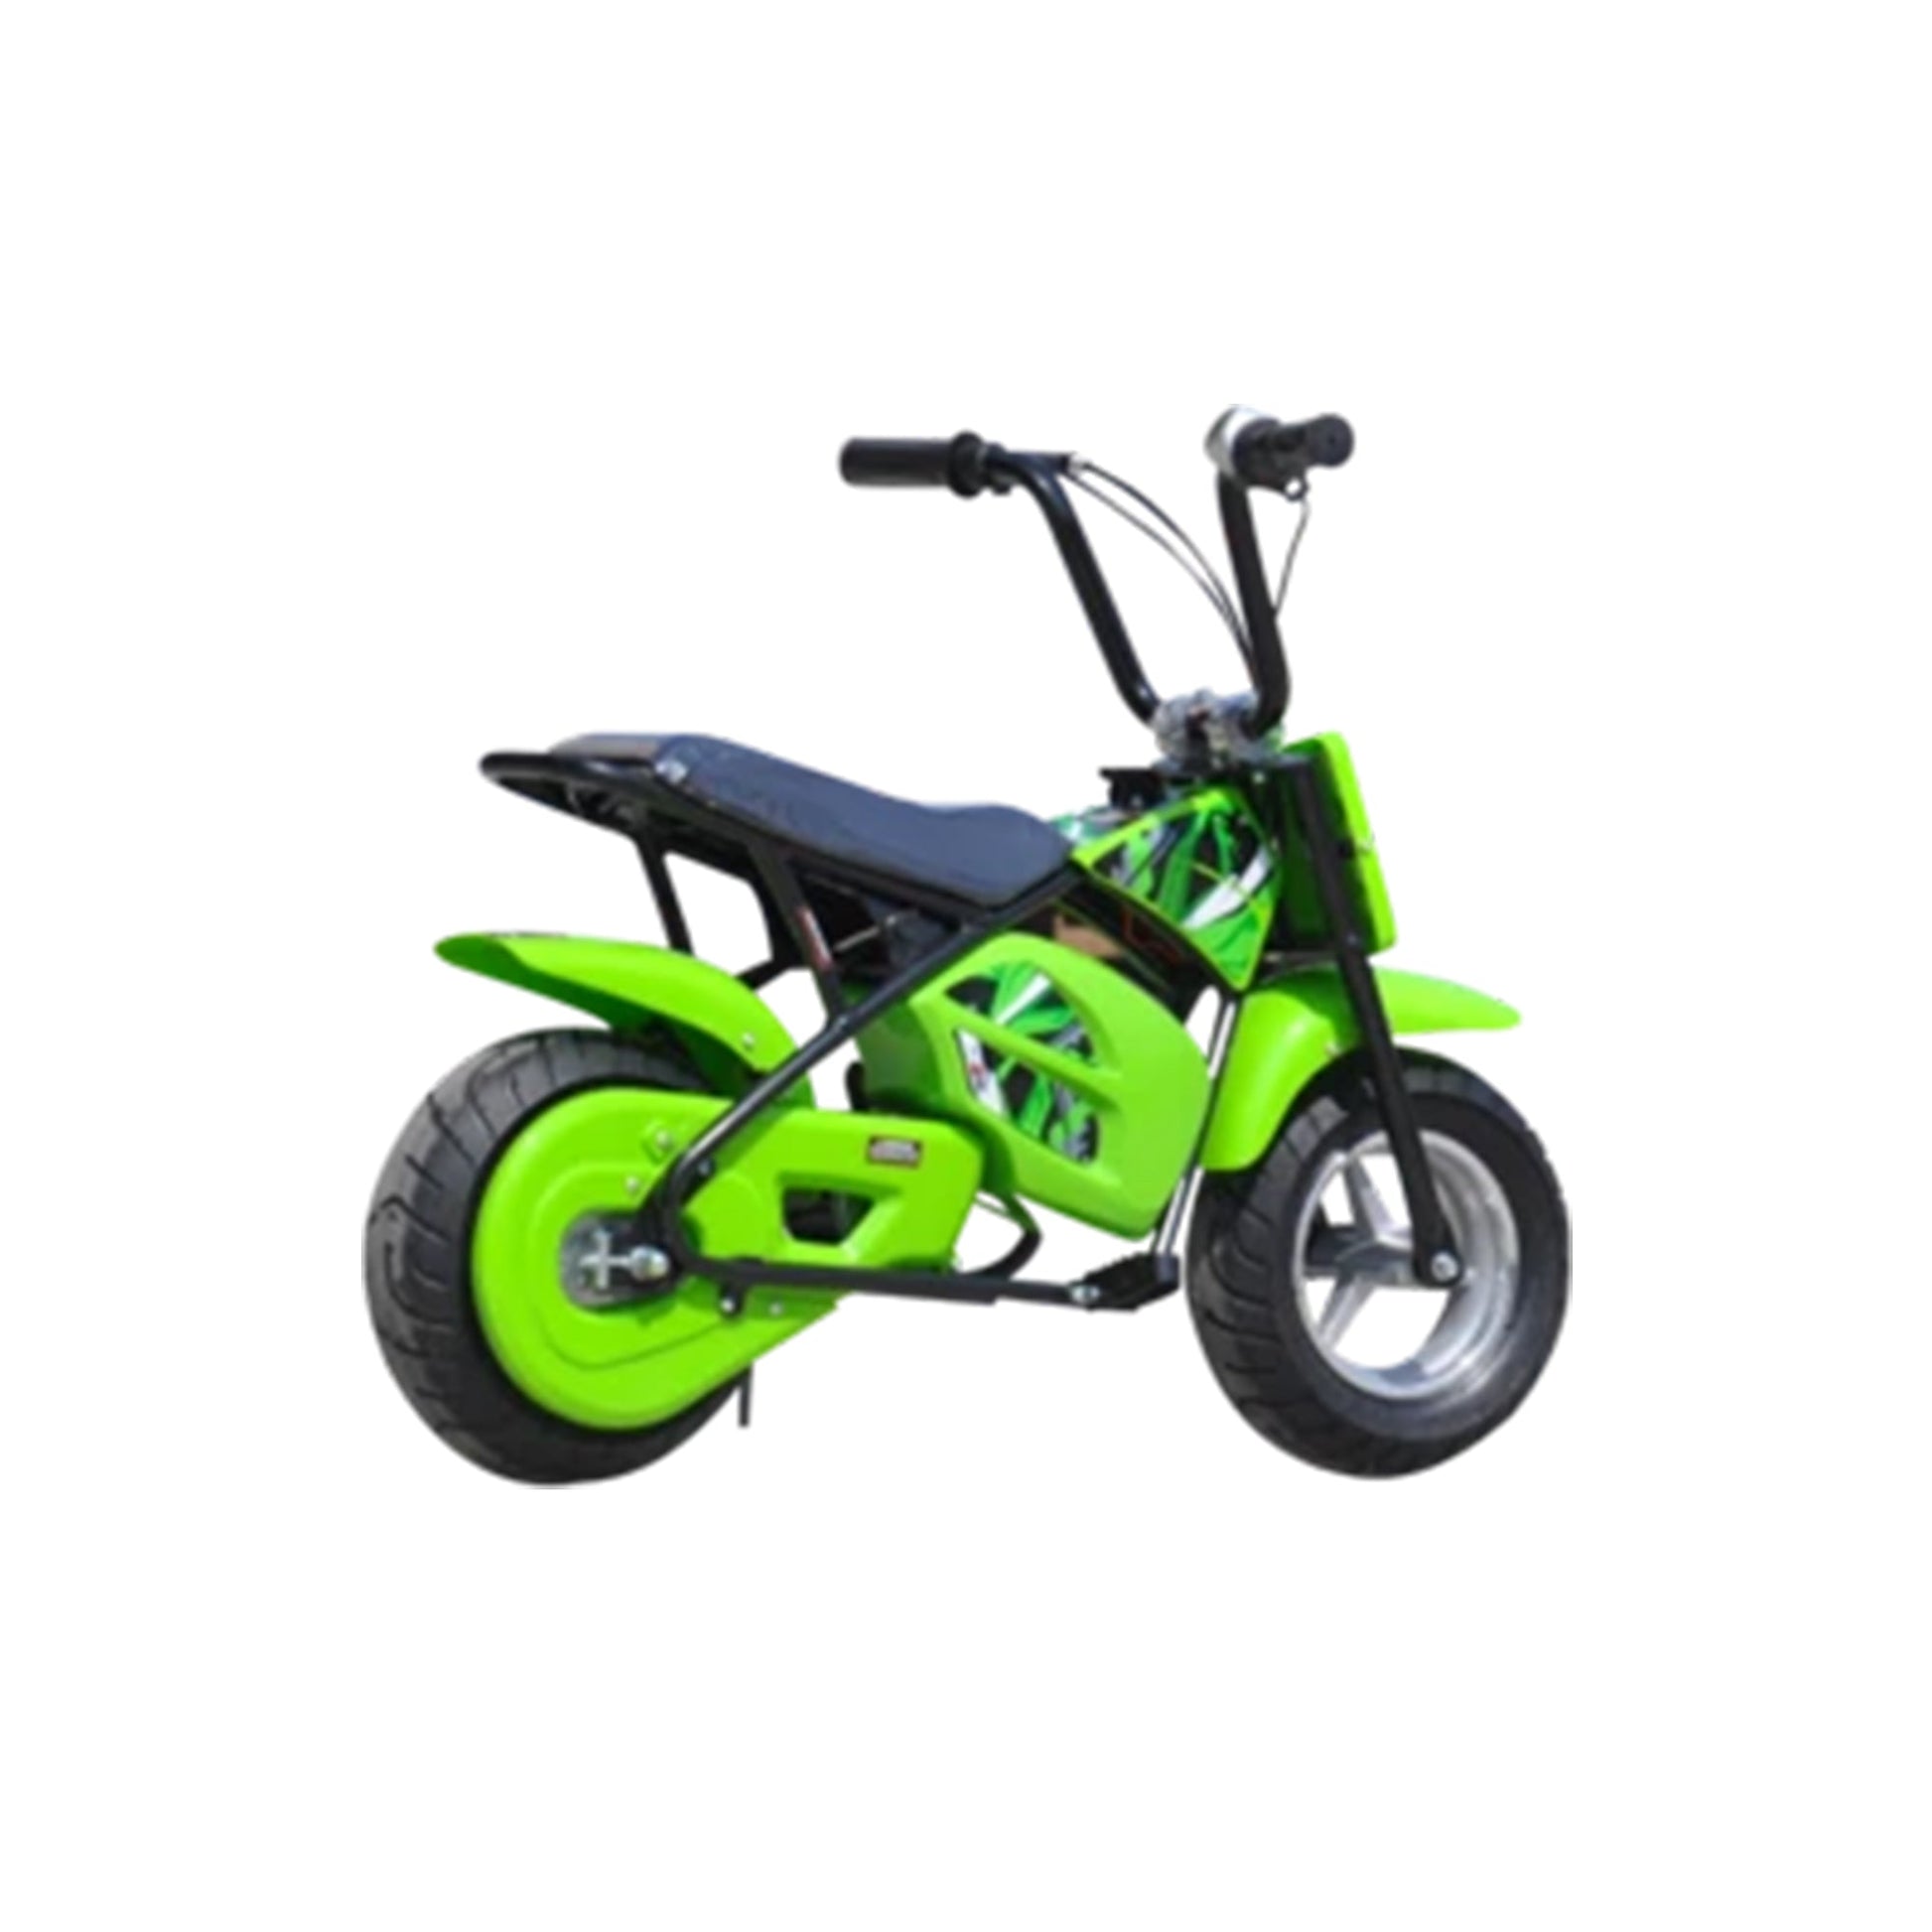 "Small green electric dirt bike mini moto for kids with twist and go throttle and brushless motor, on white background"